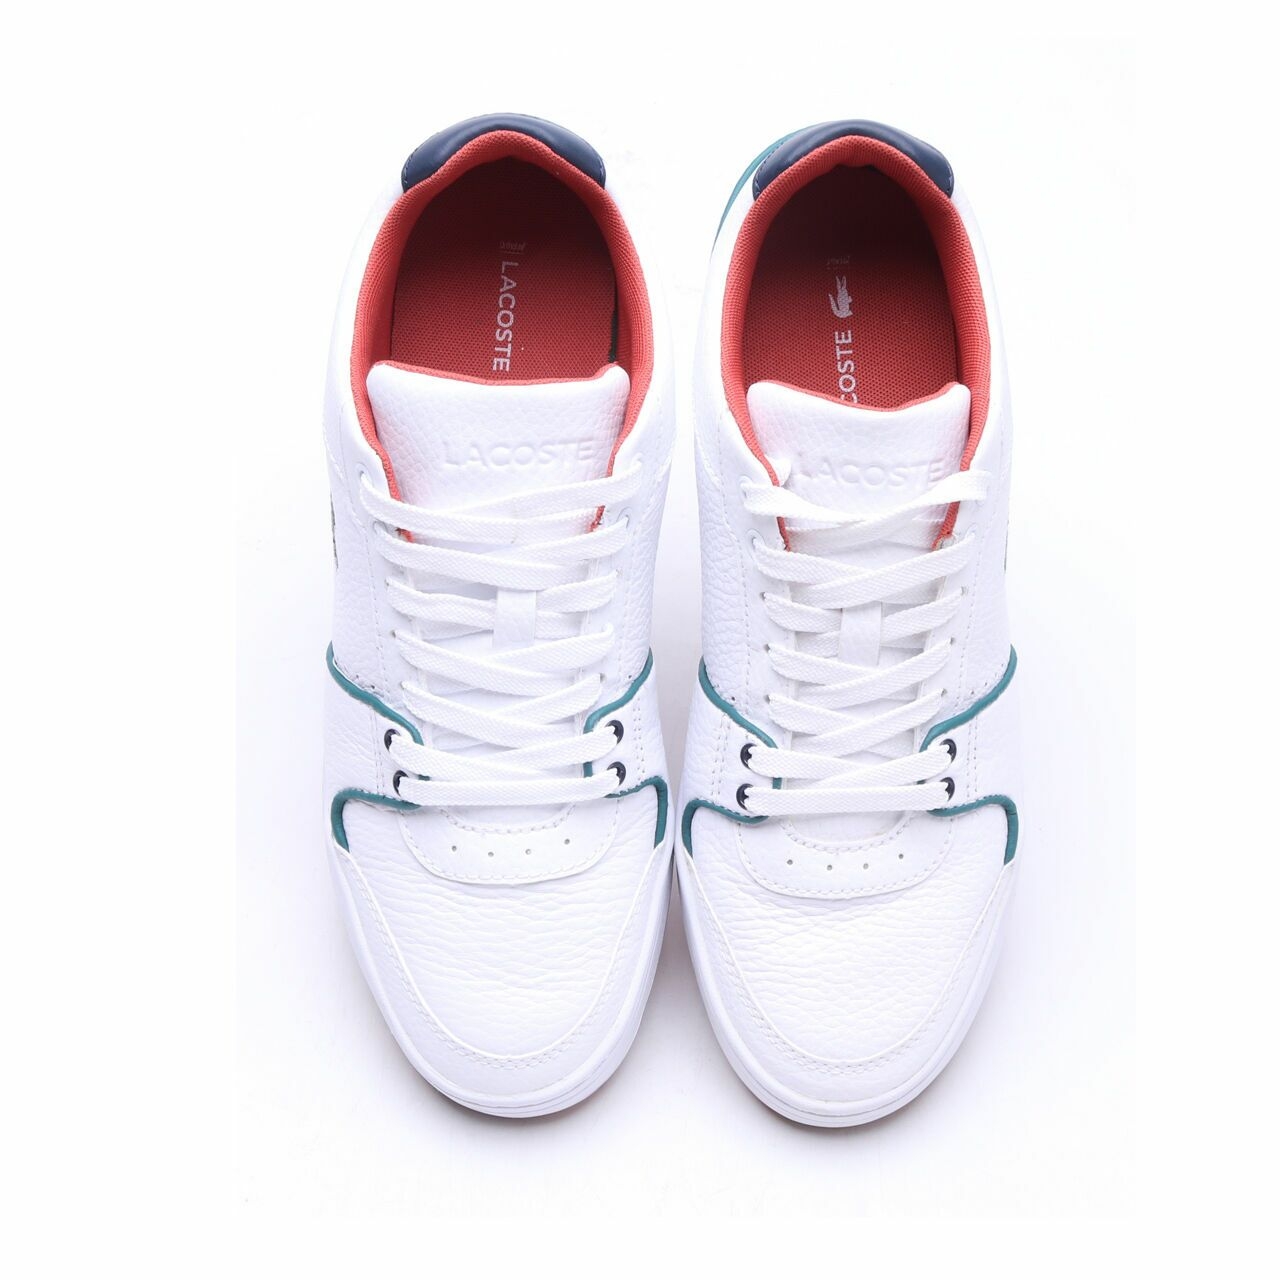 Lacoste White Sneakers